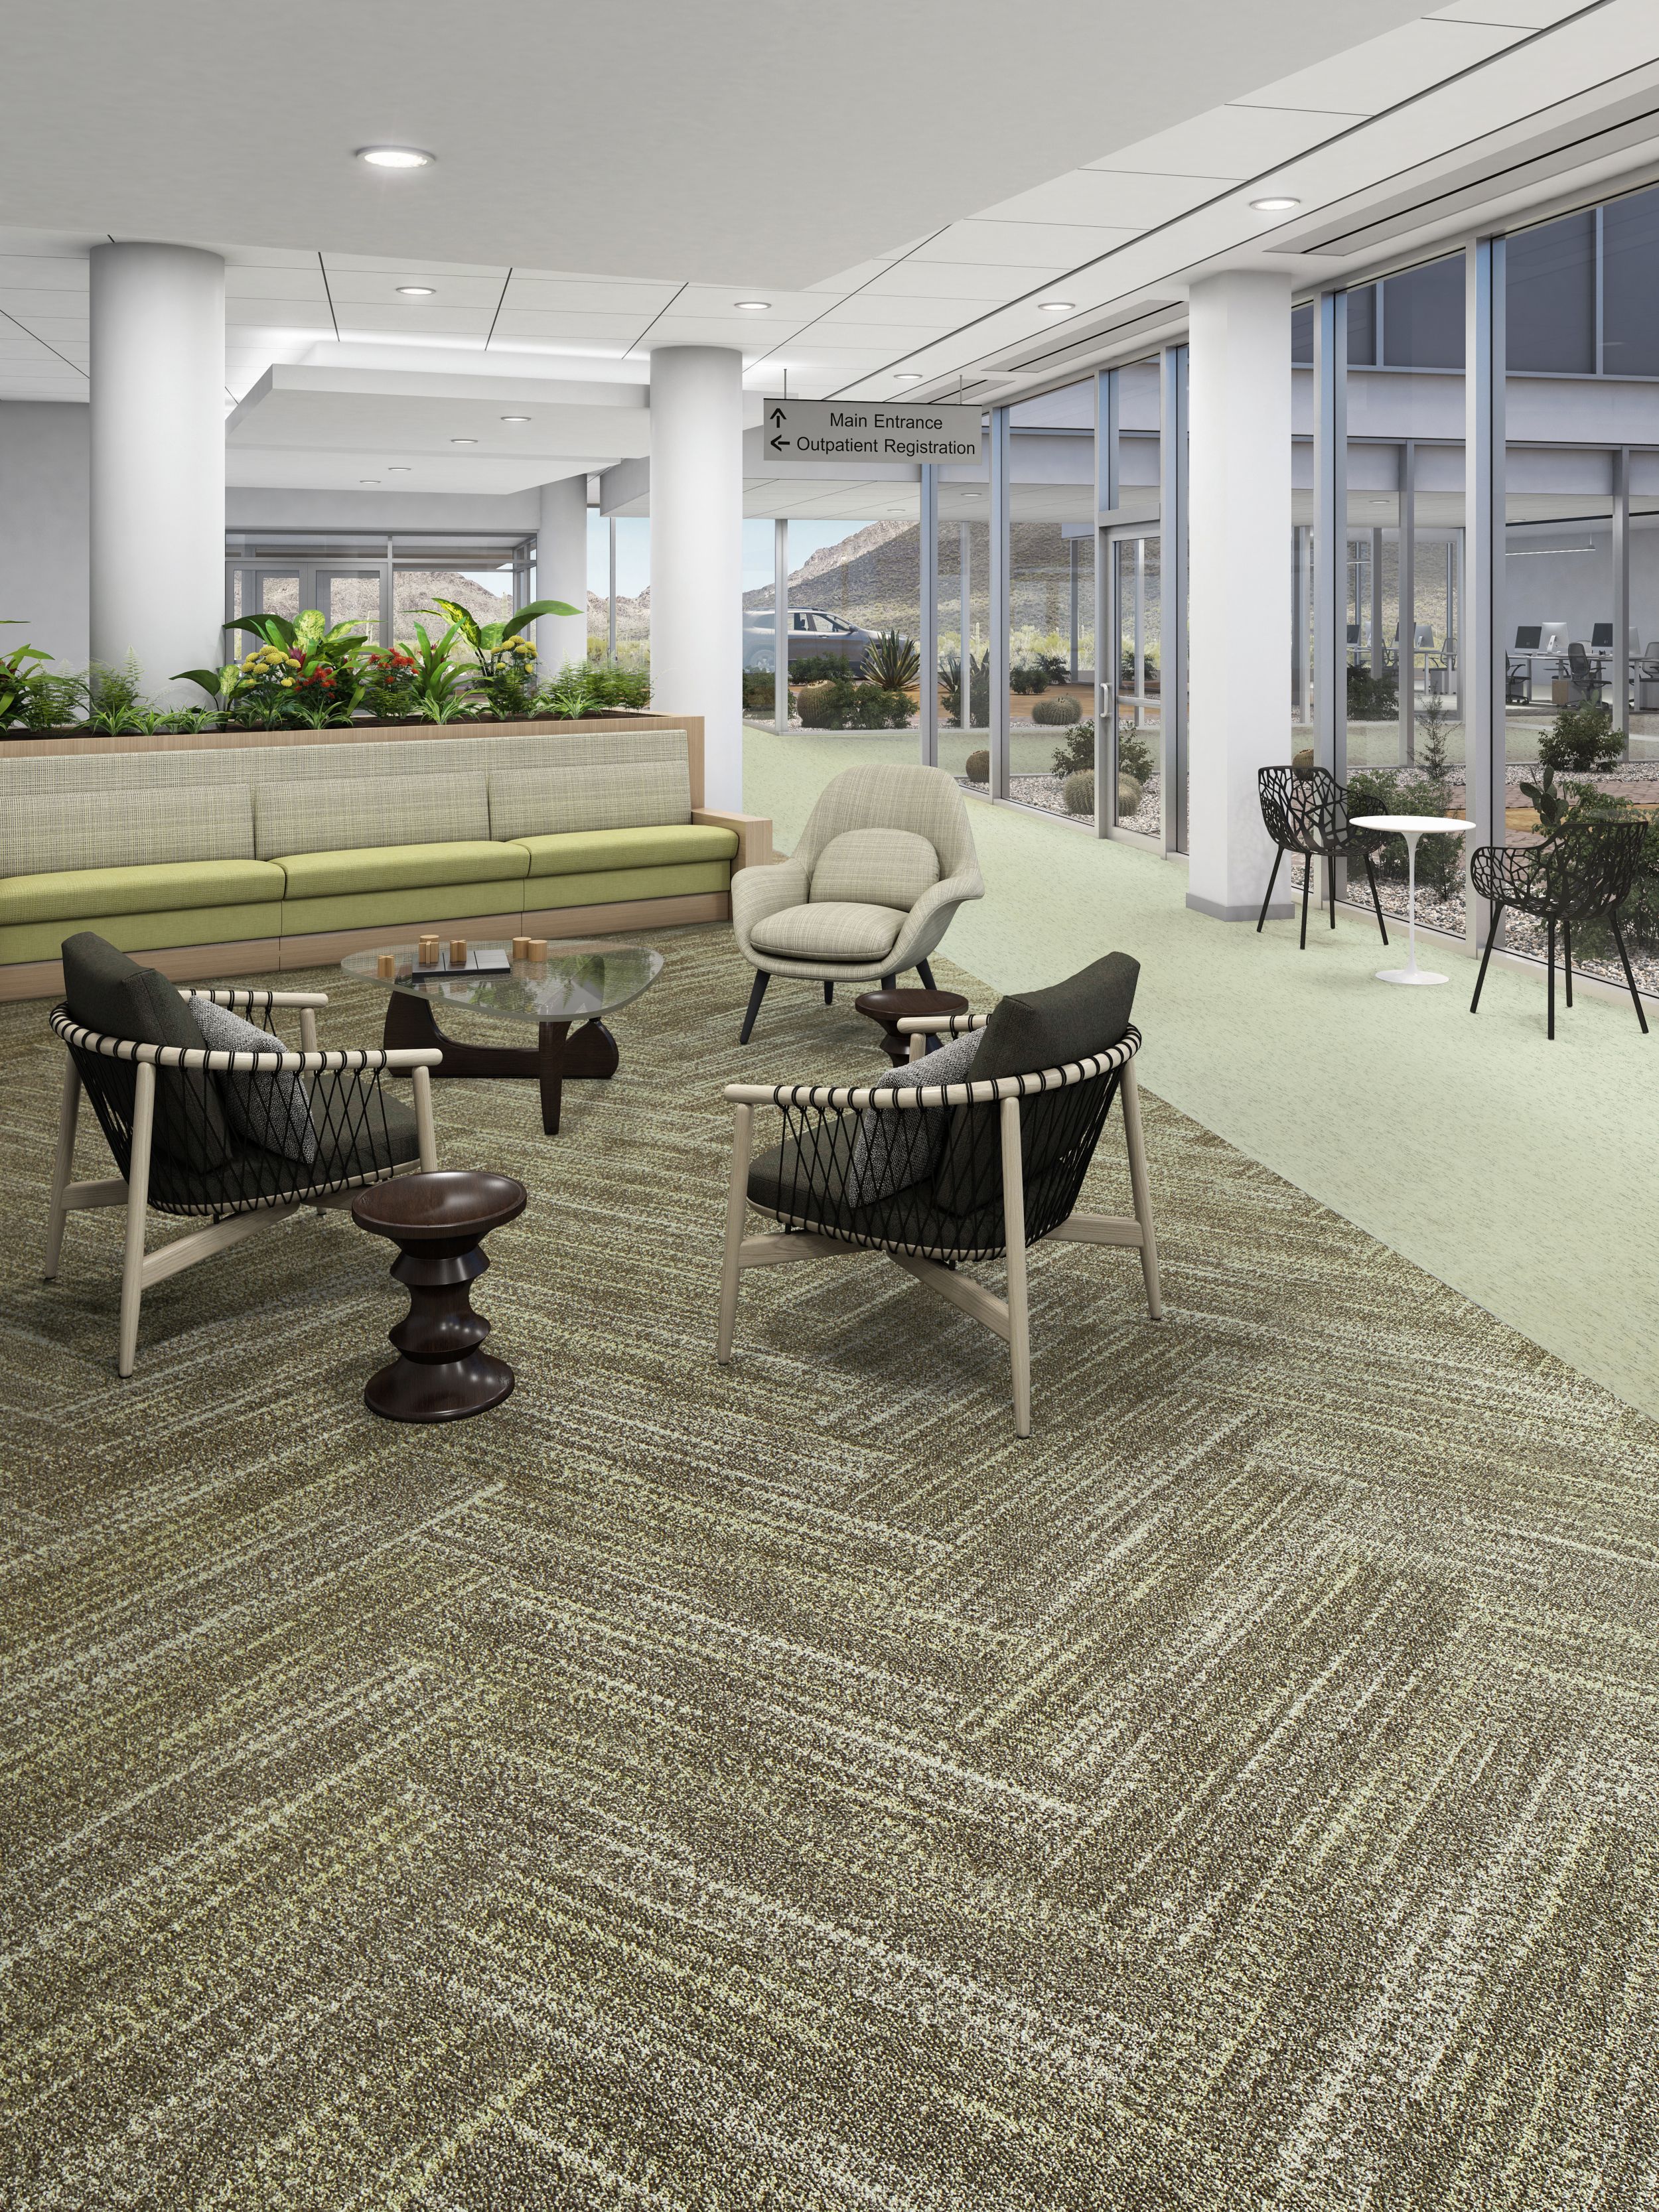 Interface Cactus Grooves plank carpet tile with Plant-astic LVT in hospital waiting area imagen número 8